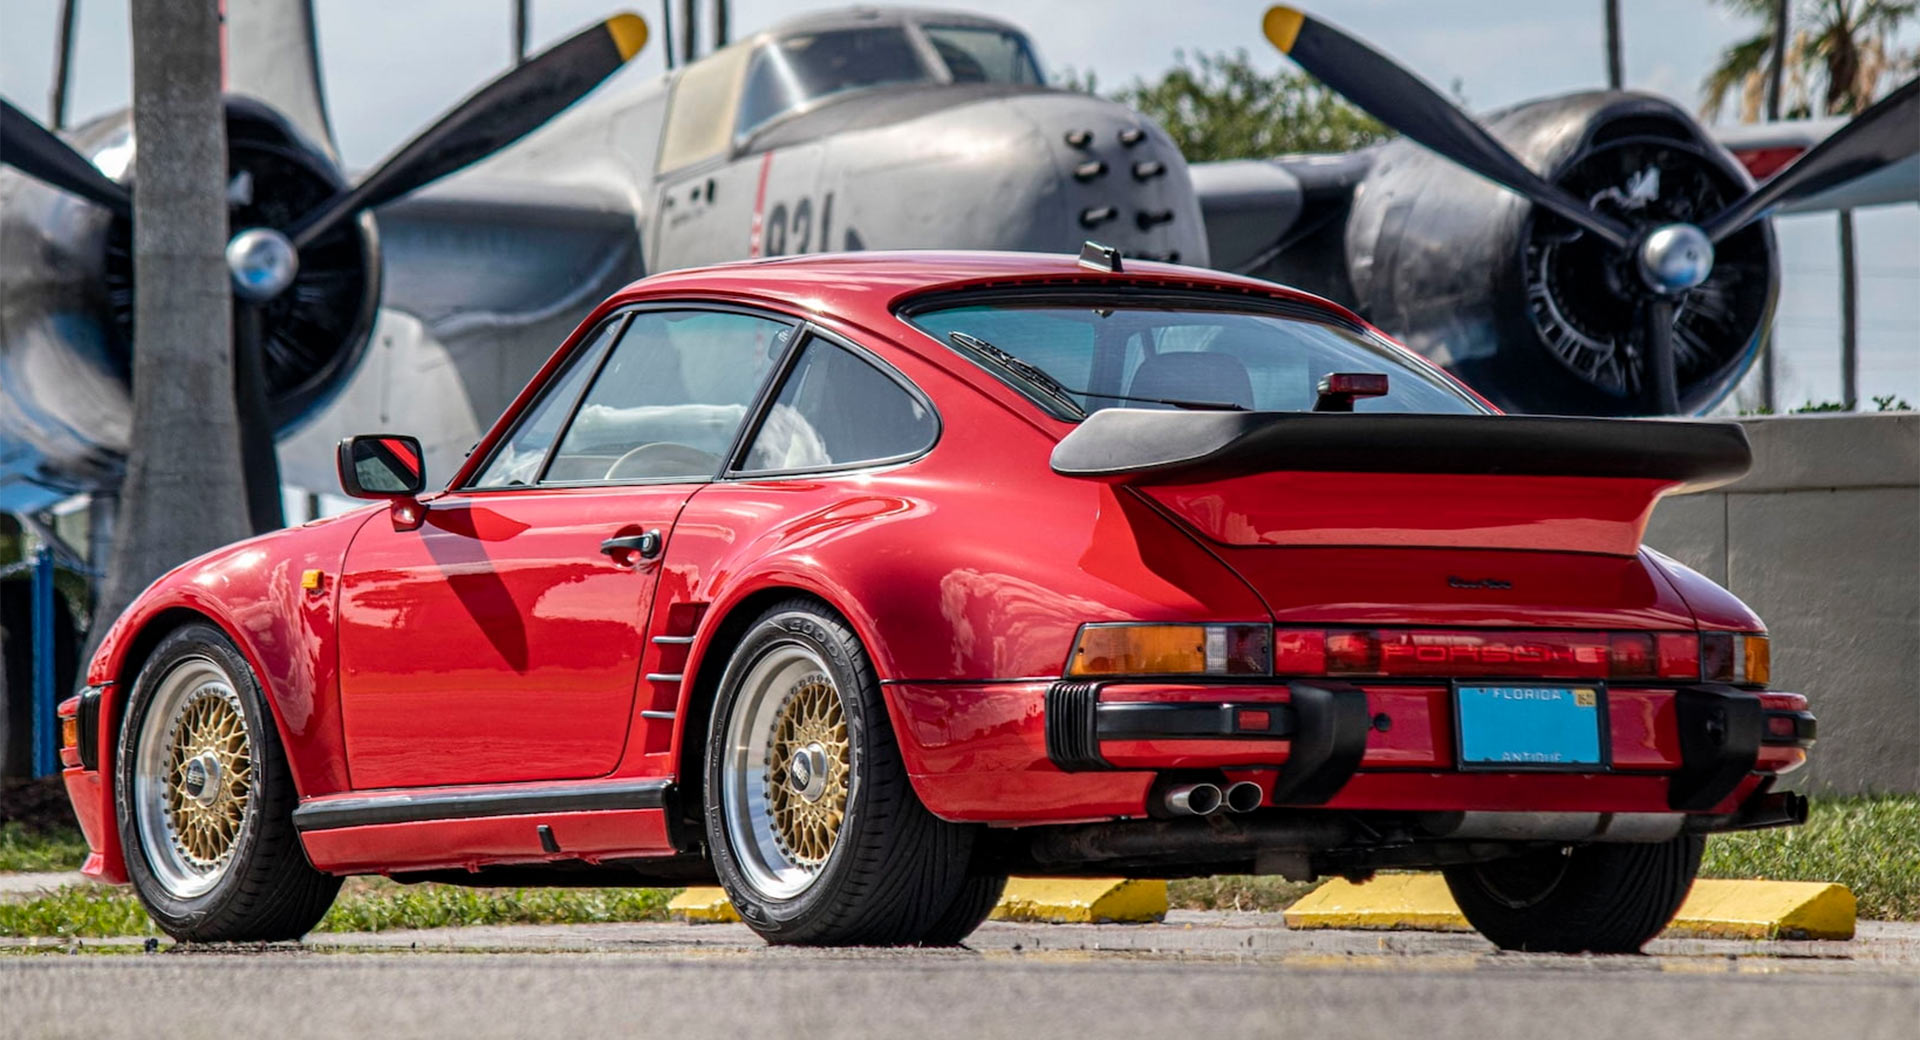 This 1987 Porsche 930 Turbo Slantnose Is The Only One Of Its Kind Carscoops Canada News Media